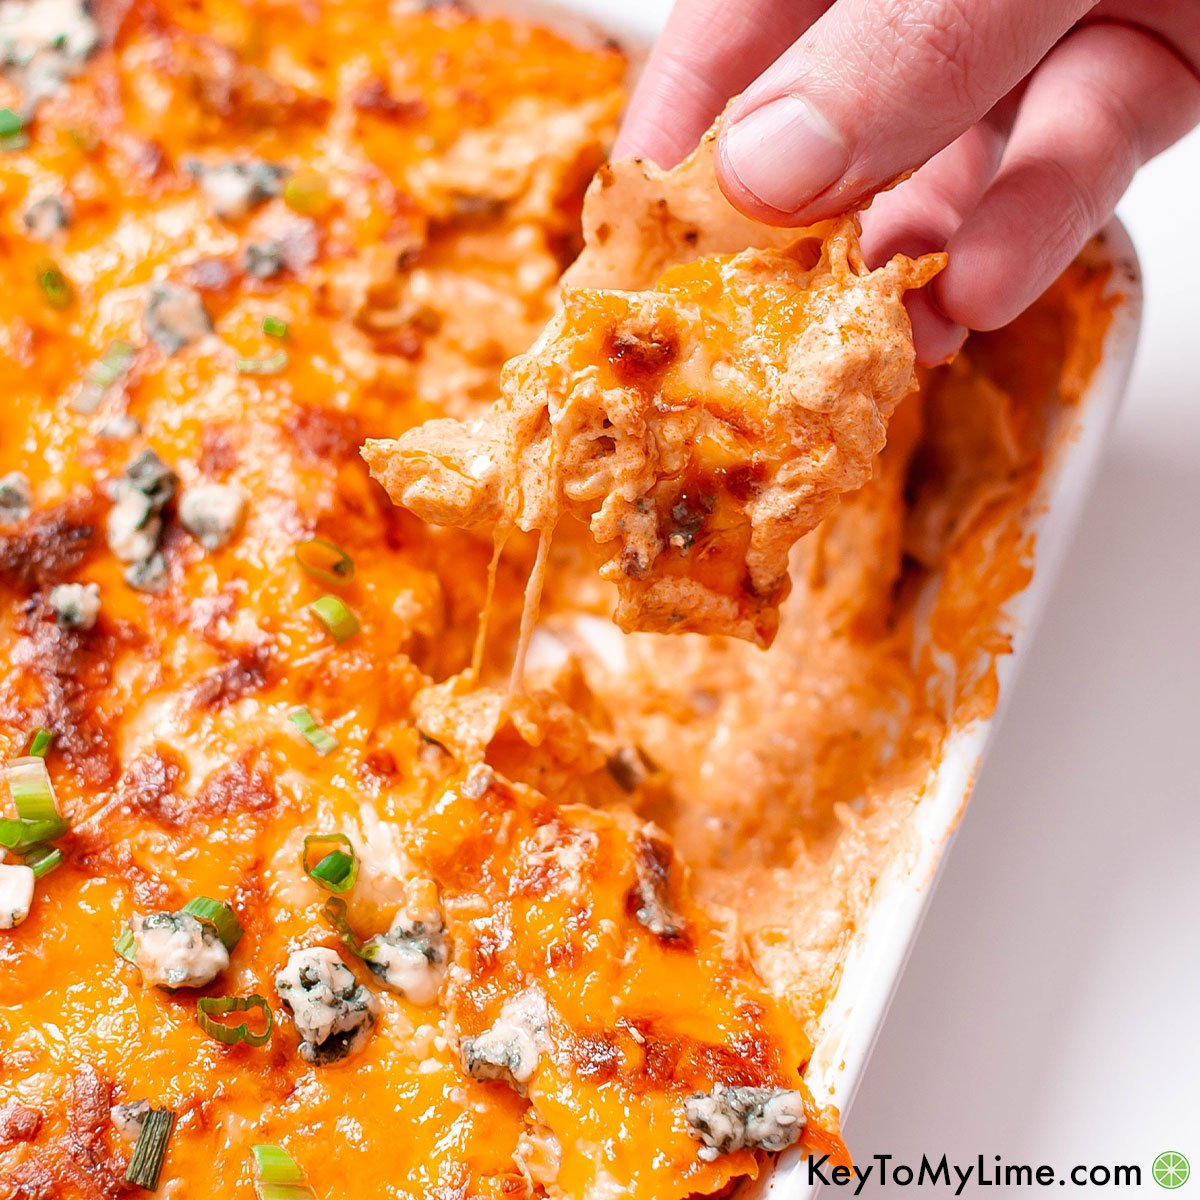 The Best Store-Bought Buffalo Chicken Dip